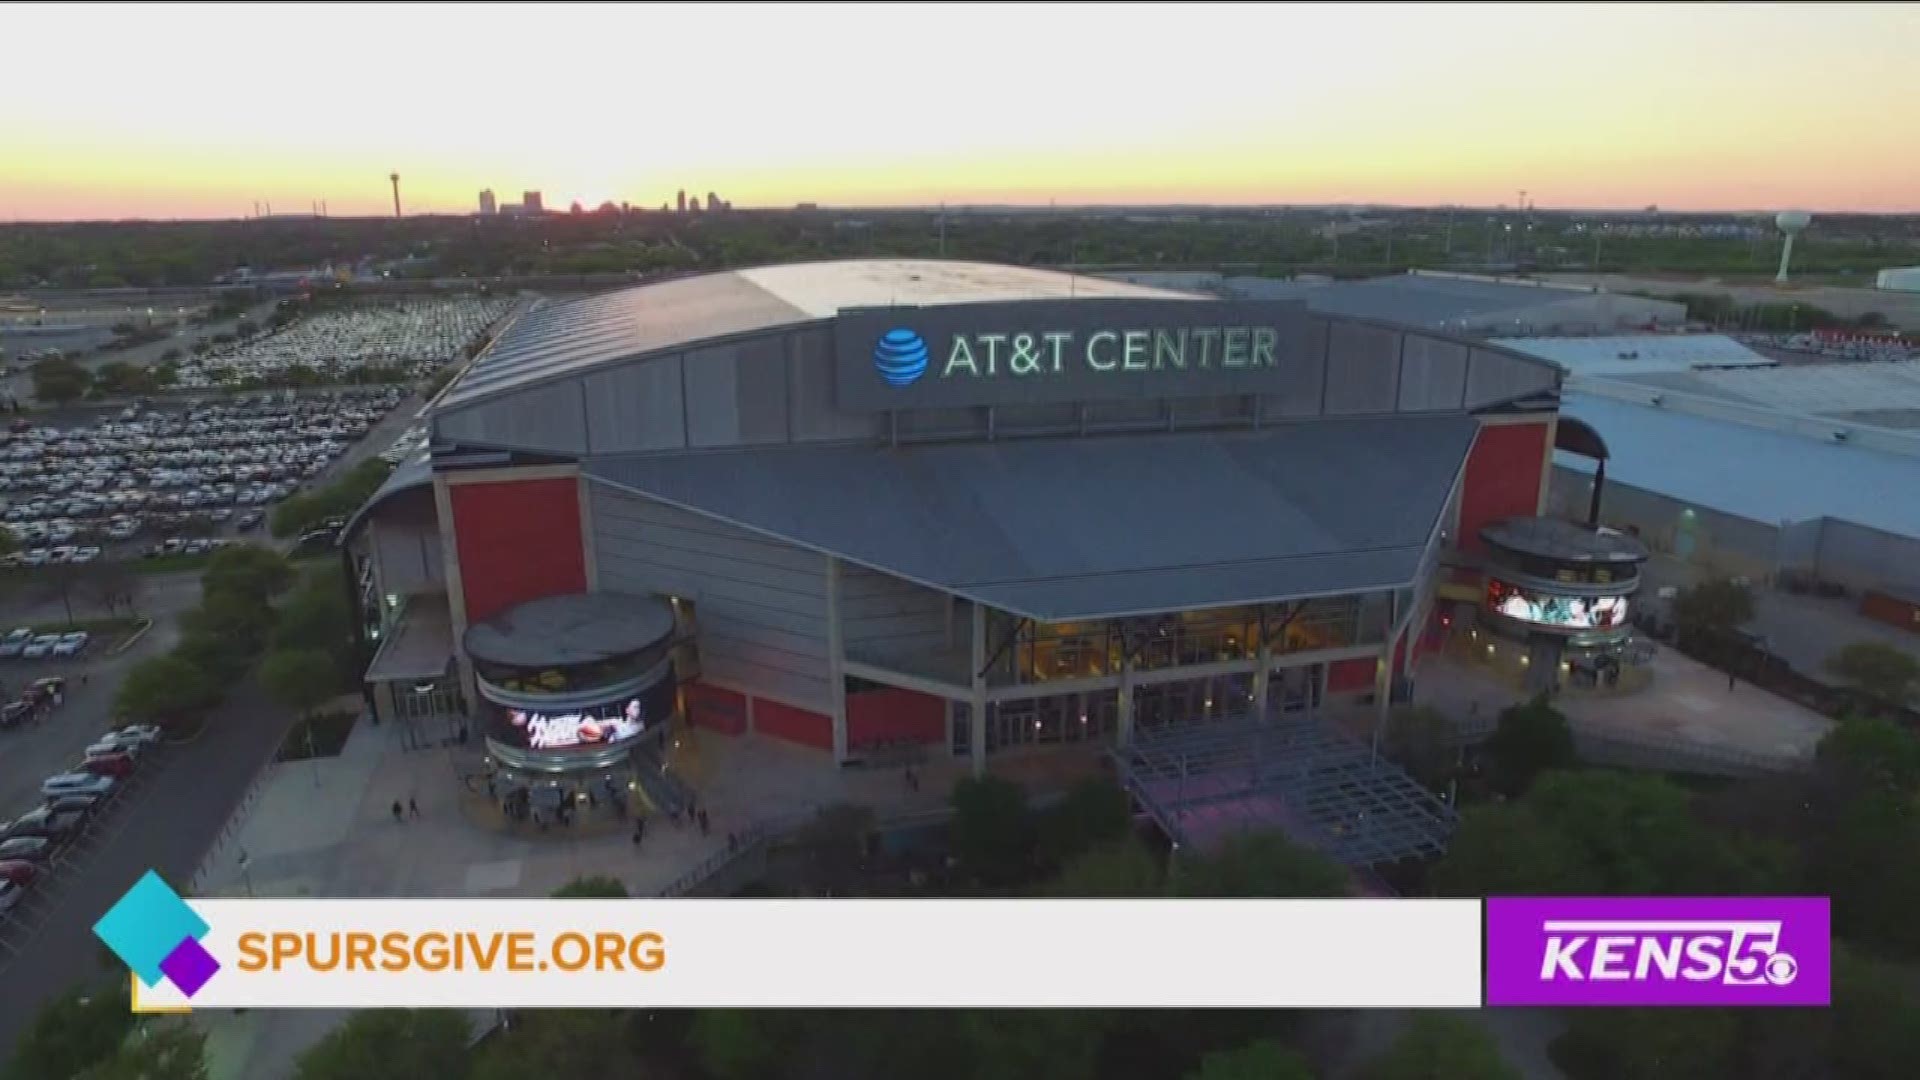 Learn more about how Spurs Give and the AT&T Center is bringing free, reliable internet to the community during the Coronavirus.